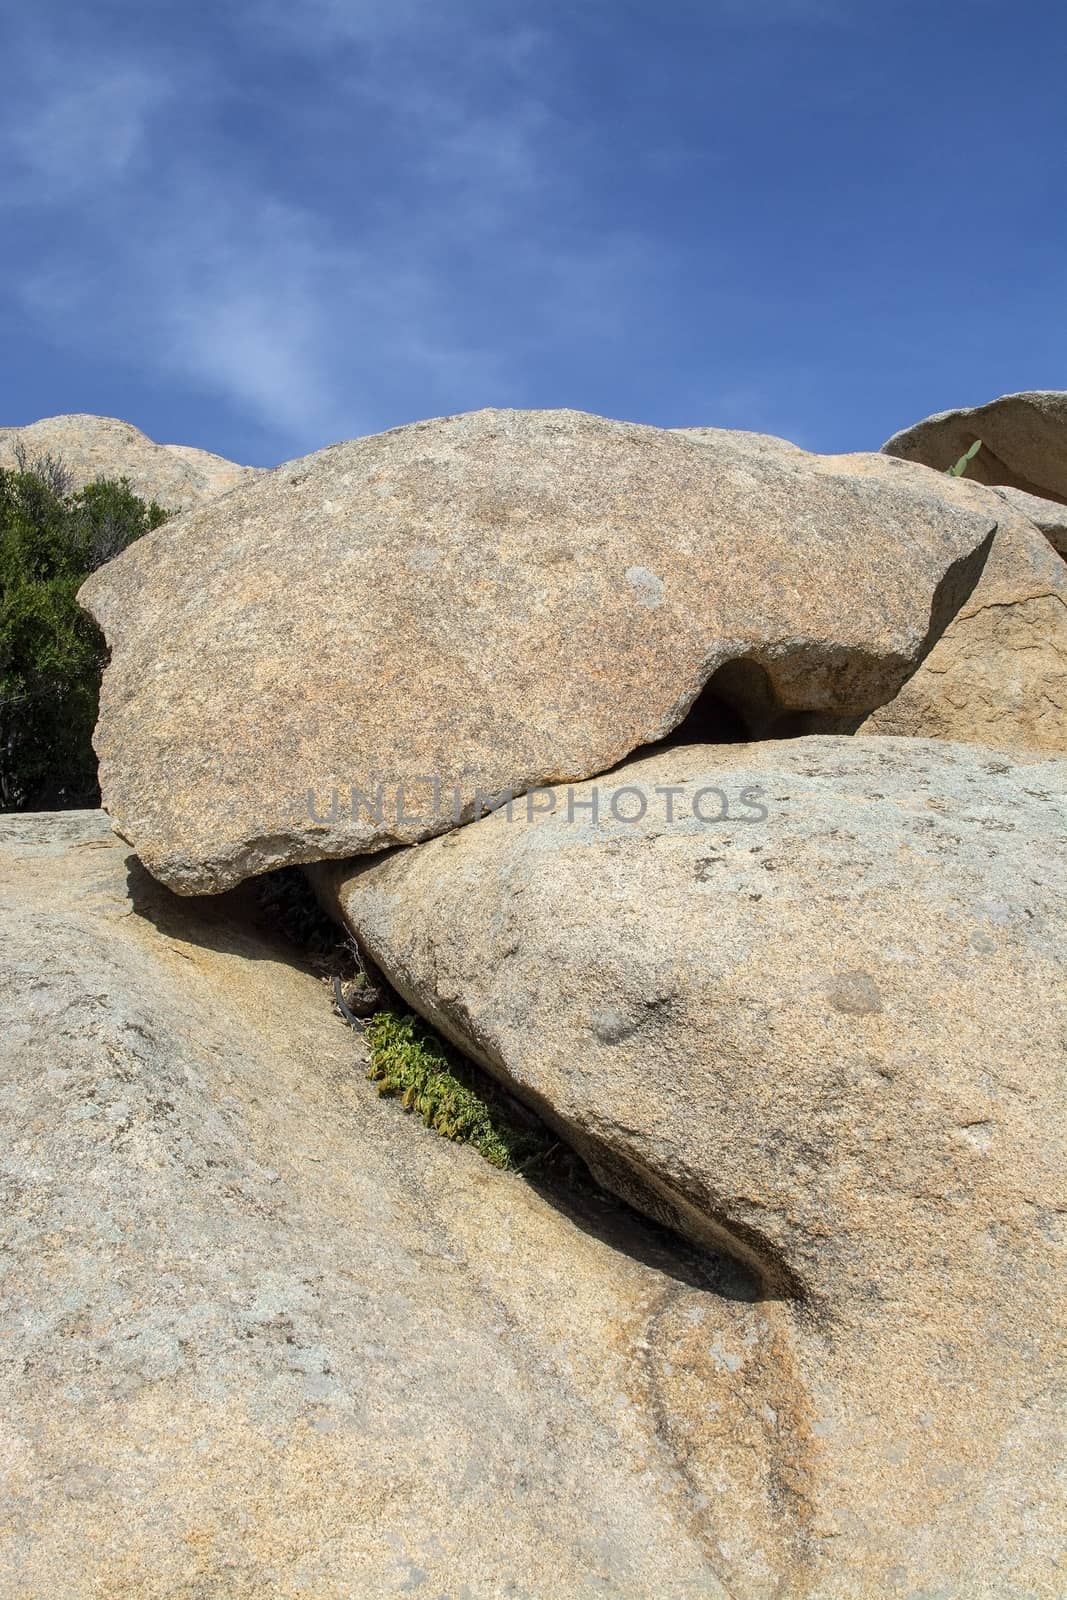 Slab of granite rock lying on top of eroded cliff with blue sky wispy cloud in Costa Smeralda, Sardinia, Italy.